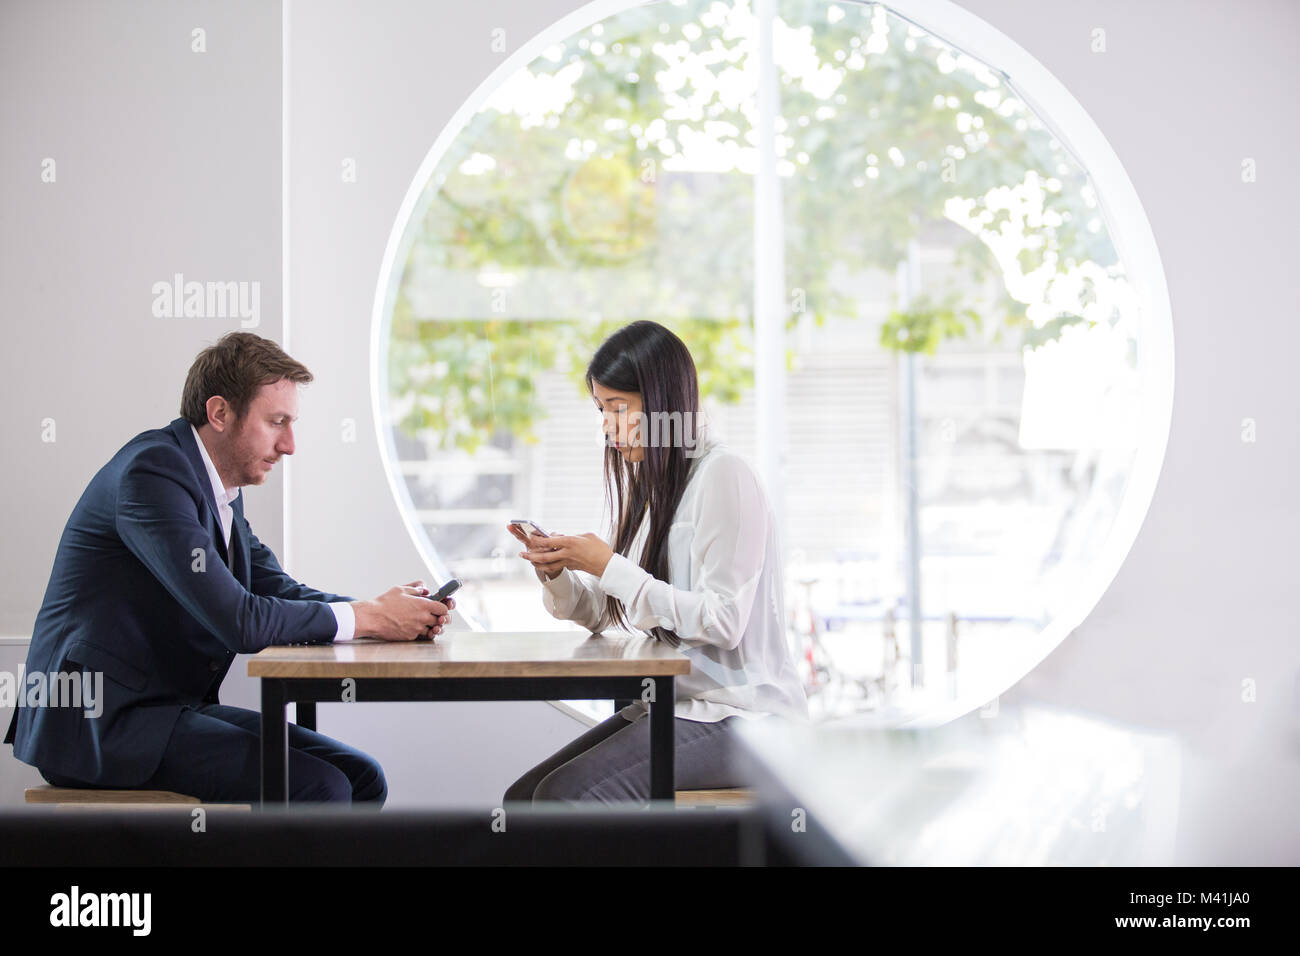 Colleagues using smartphone in an office Stock Photo